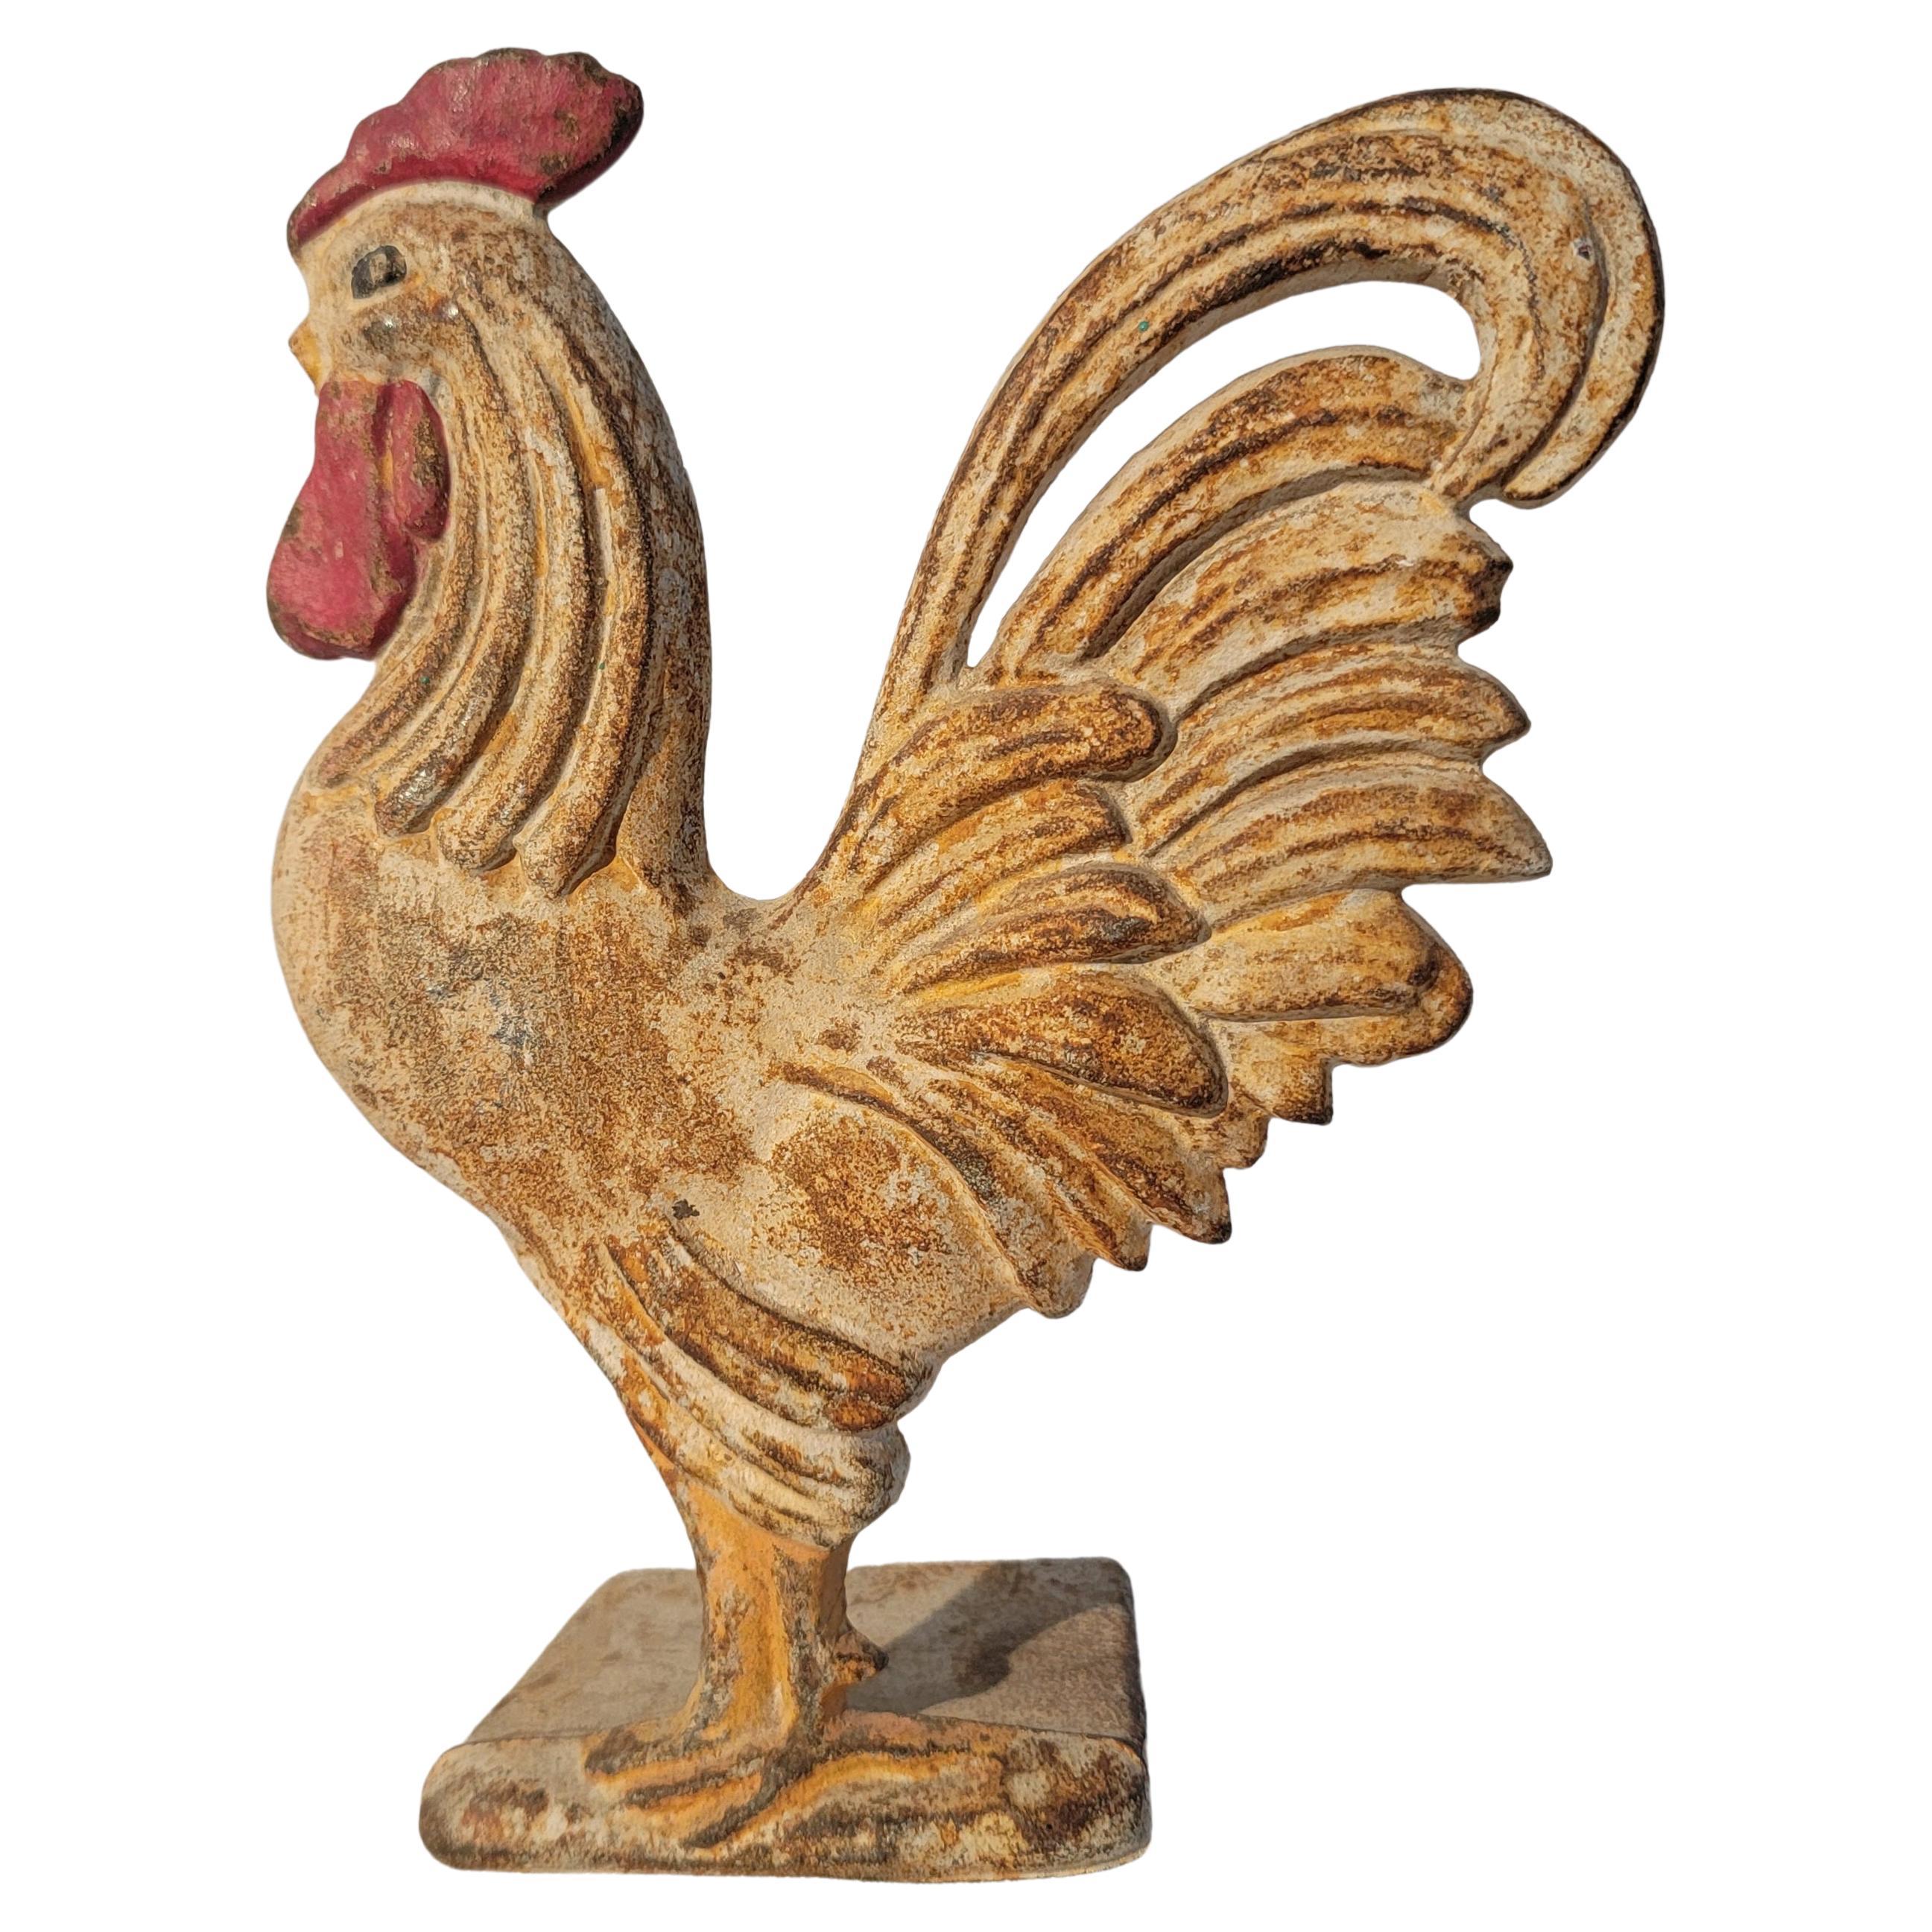 Rustic Brown Cast Iron Rooster Doorknocker 7 1/4"wide by 7 3/4" TALL 01629 